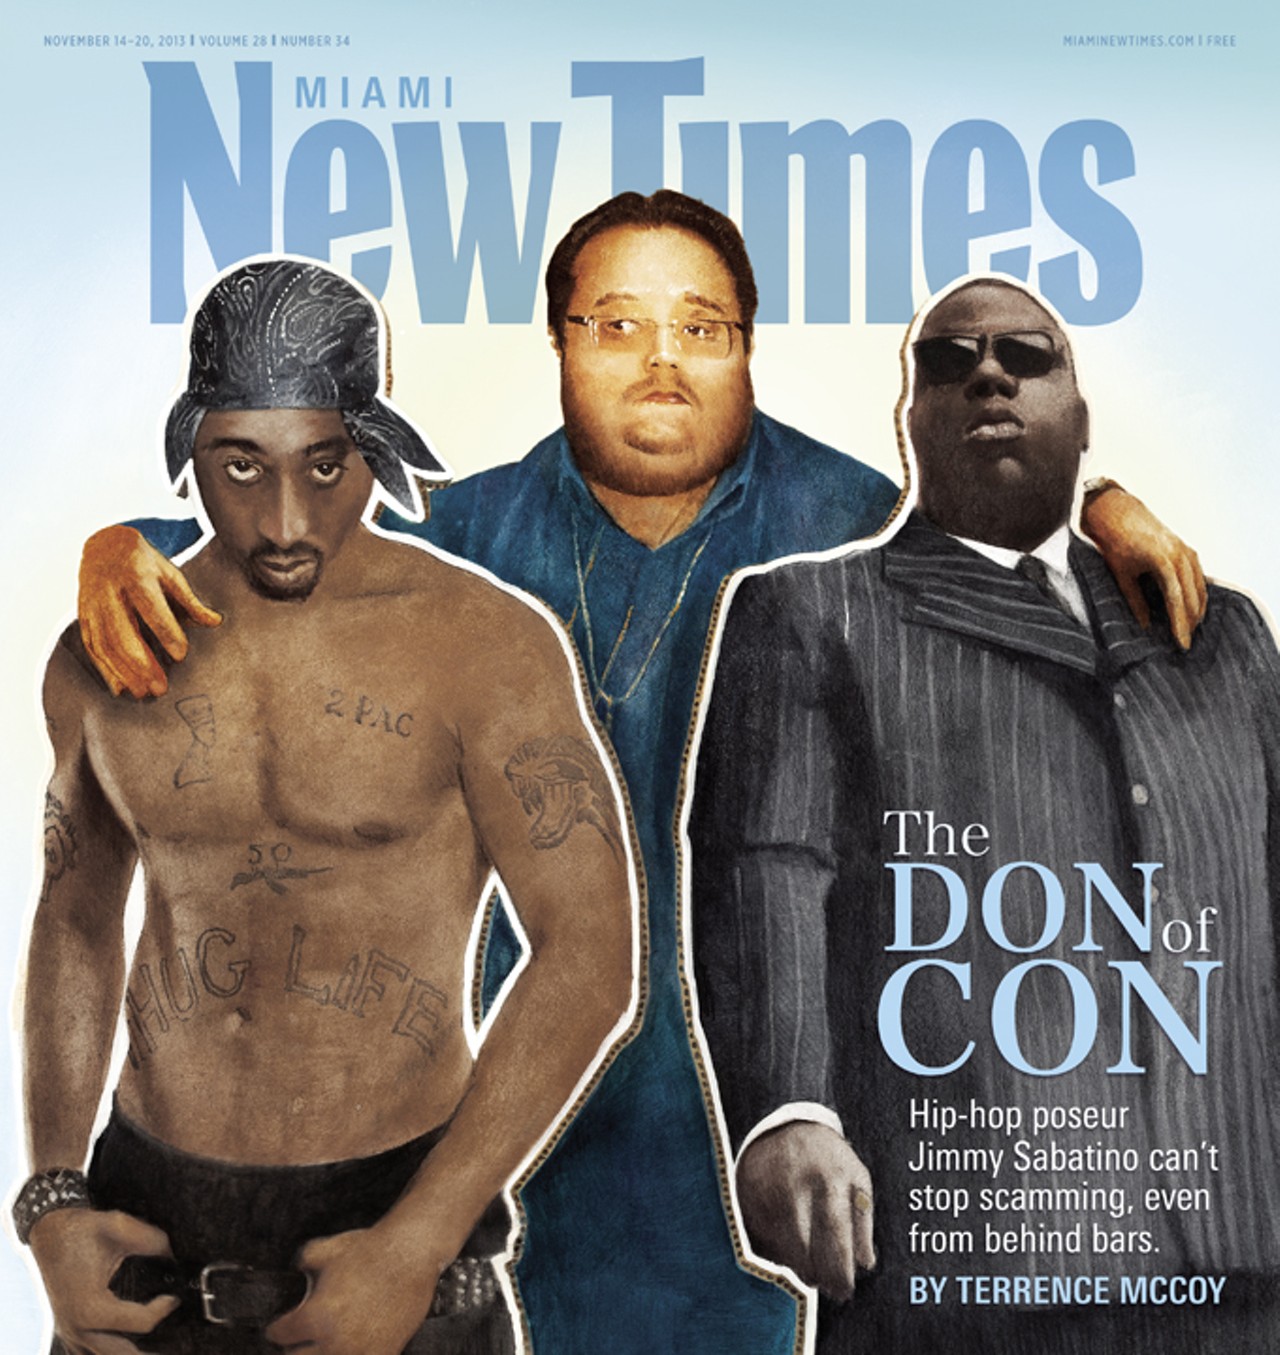 "The Don of Con," by Terrence McCoy in the Miami New Times.